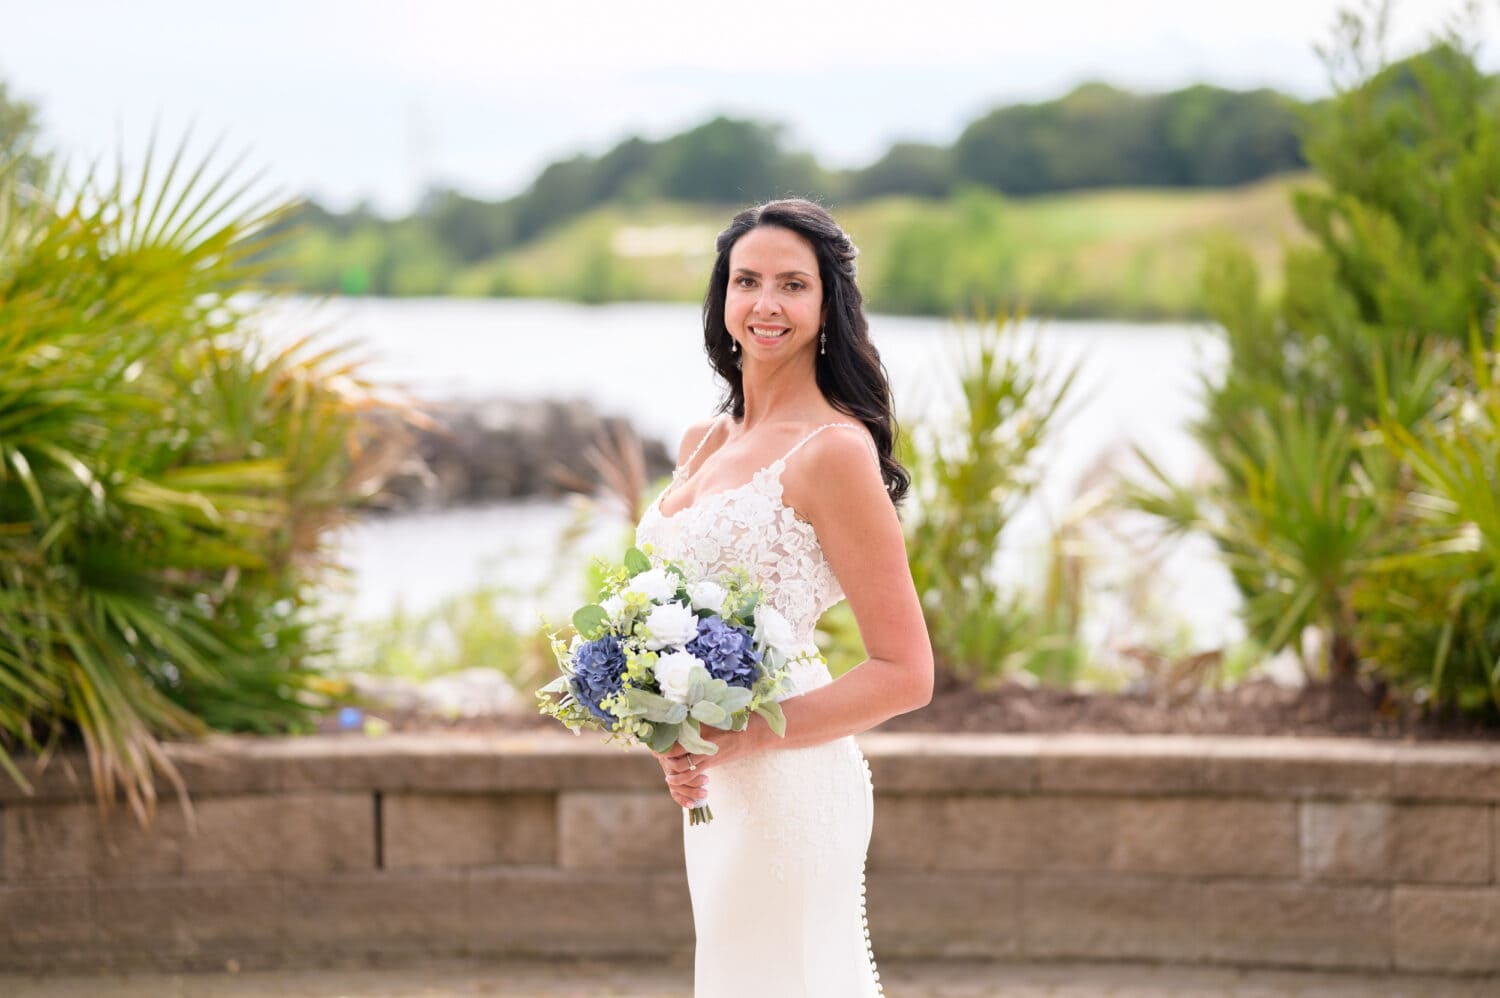 Portraits of bride by the water on the marina - The Marina Inn